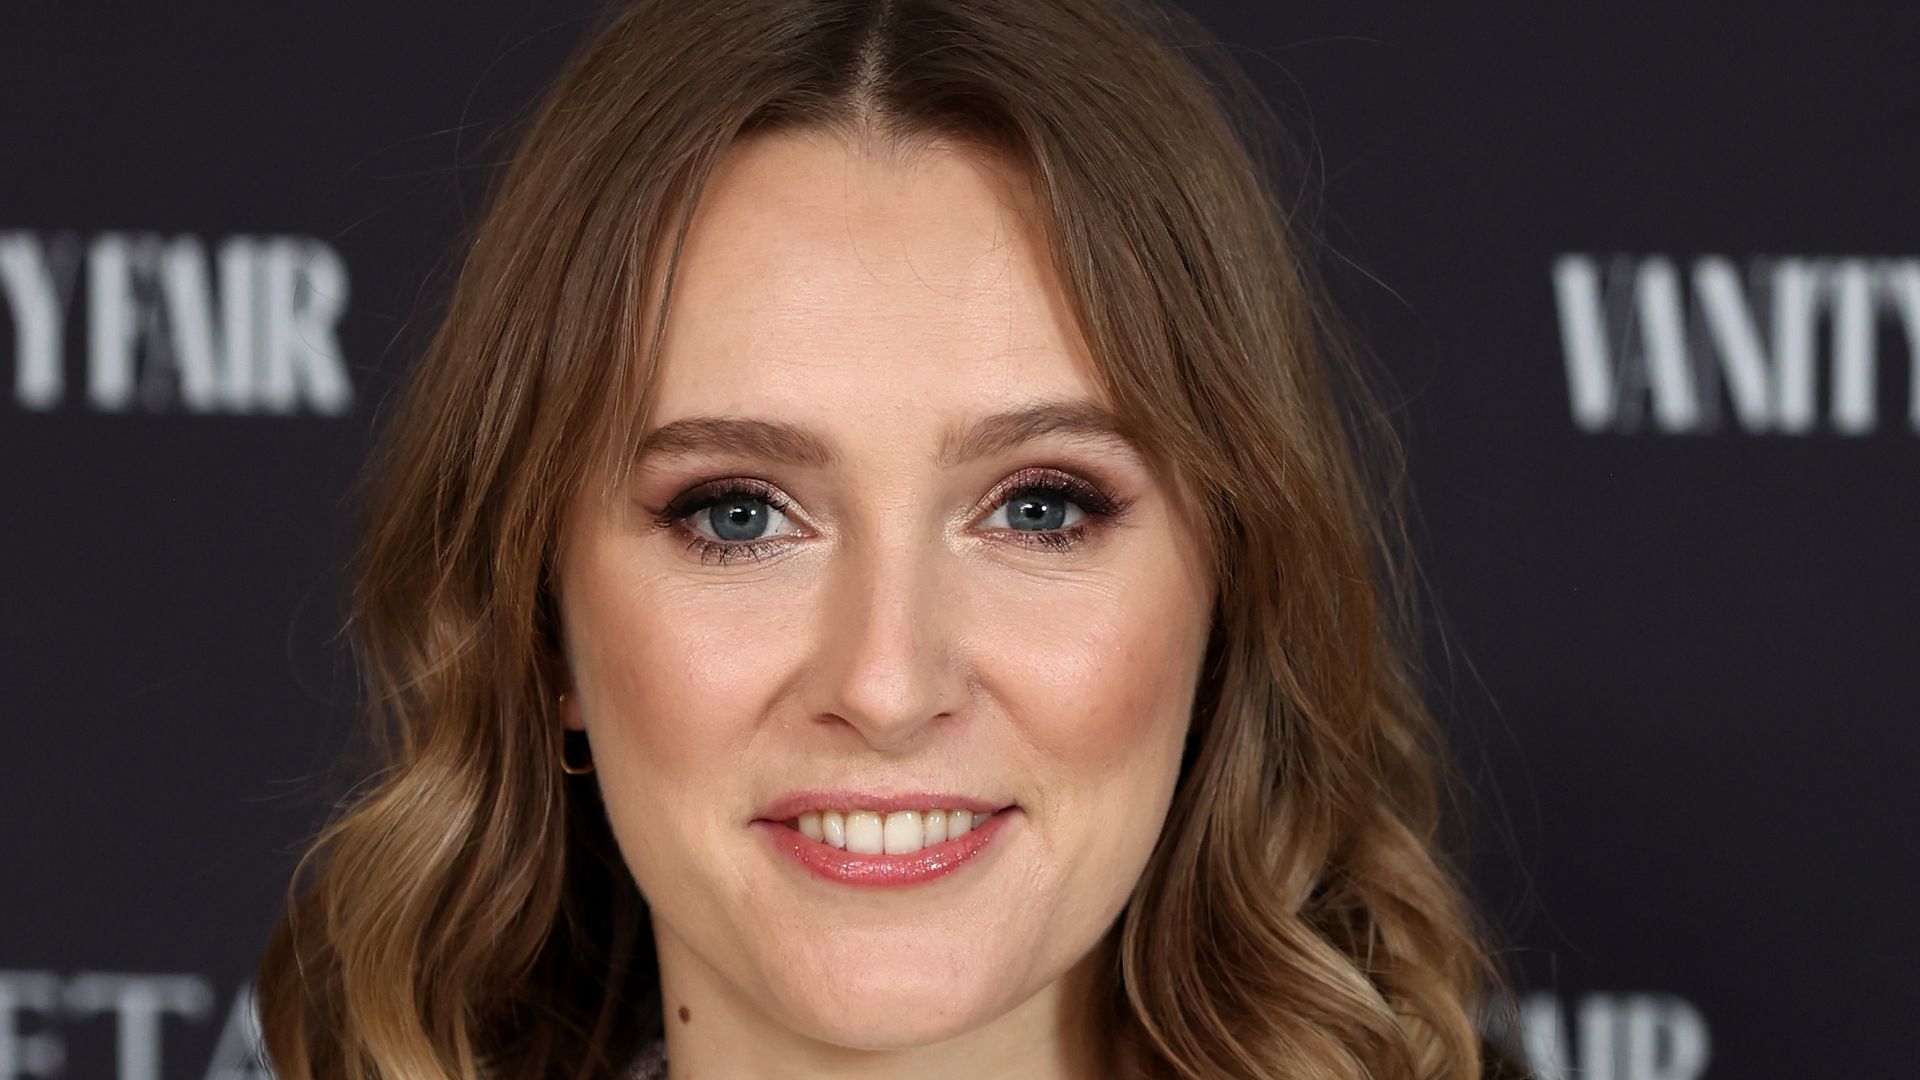 Strictly star Rose Ayling-Ellis shares poignant news one day after co-star Giovanni Pernice is axed from dance competition